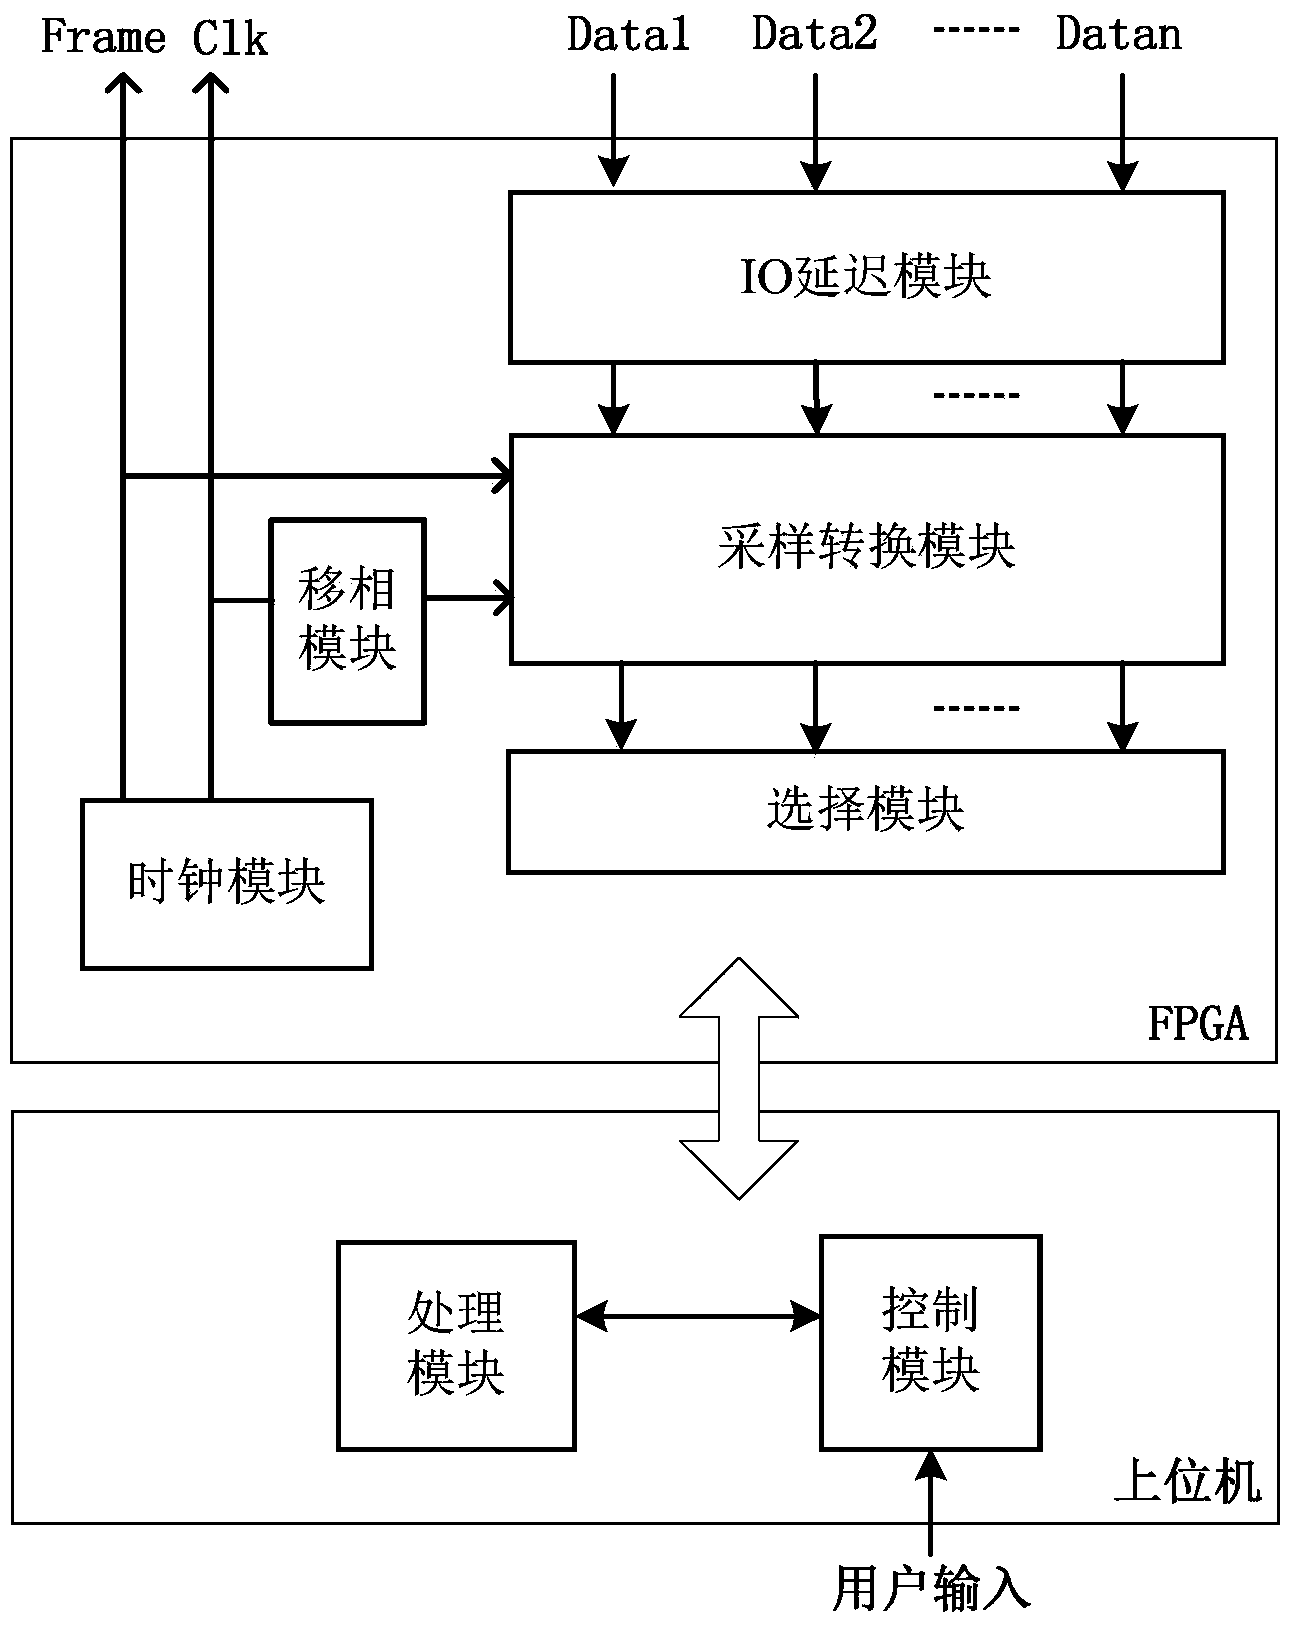 FPGA (Field Programmable Gate Array) based multi-channel data transmission synchronization delay measurement method and system